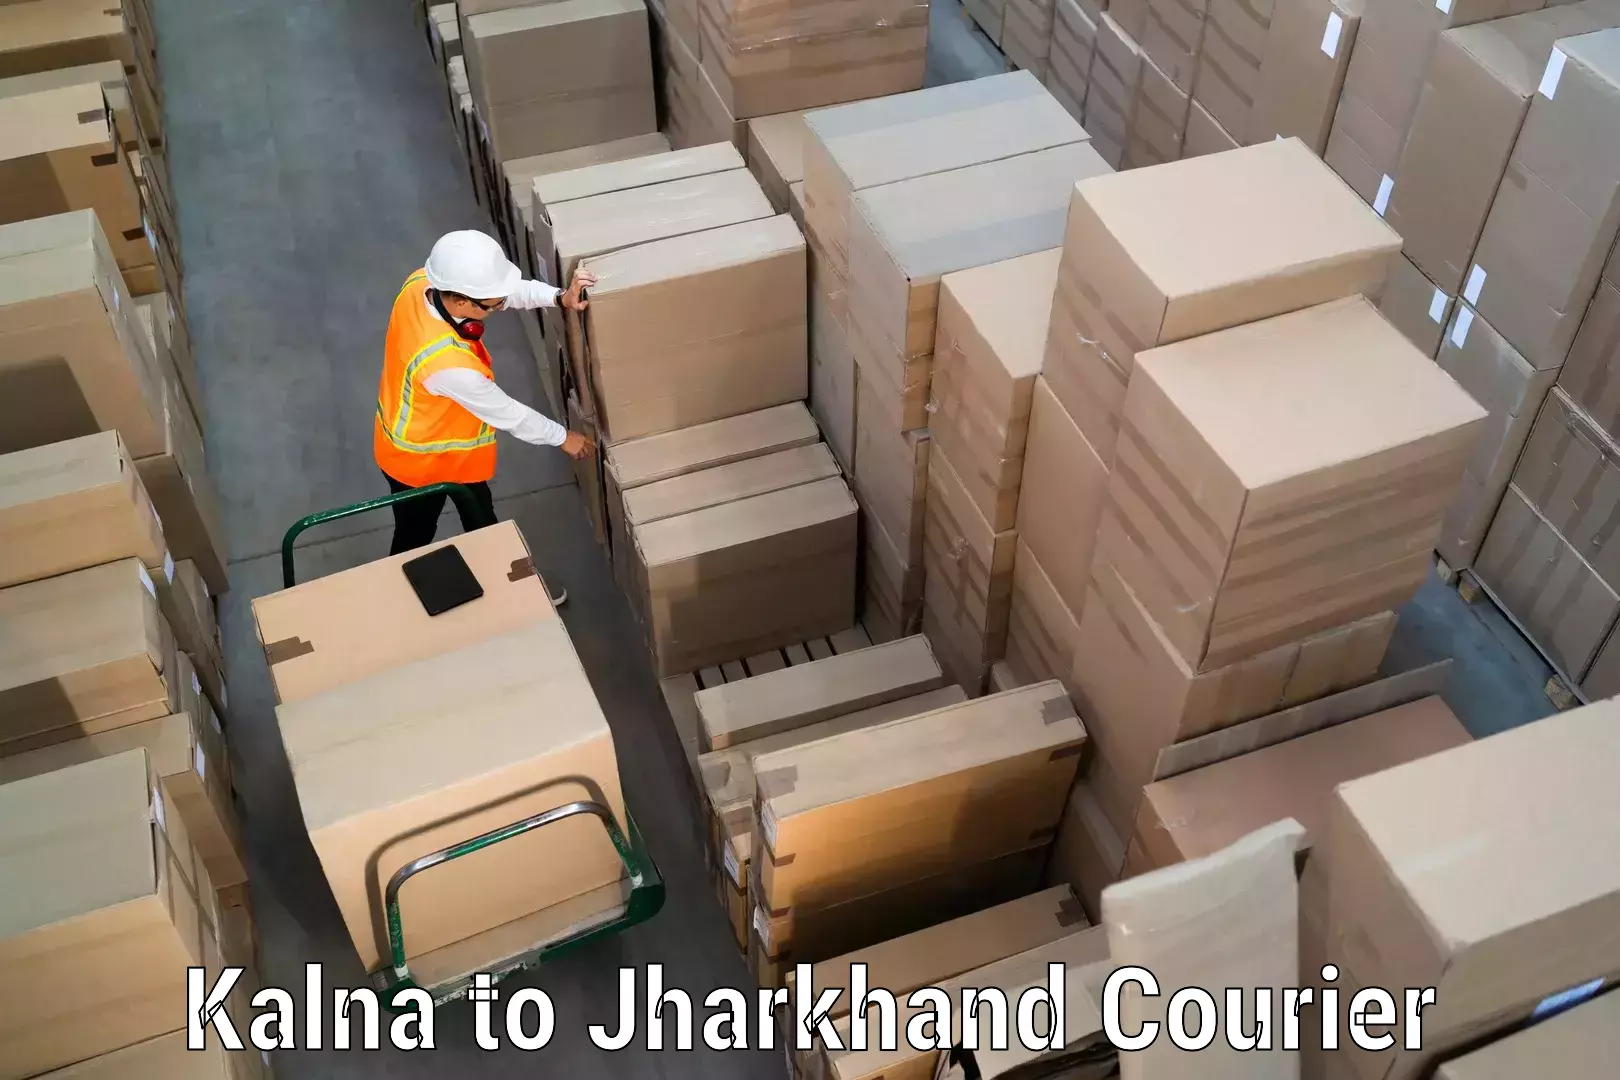 Pharmaceutical courier in Kalna to IIT Dhanbad